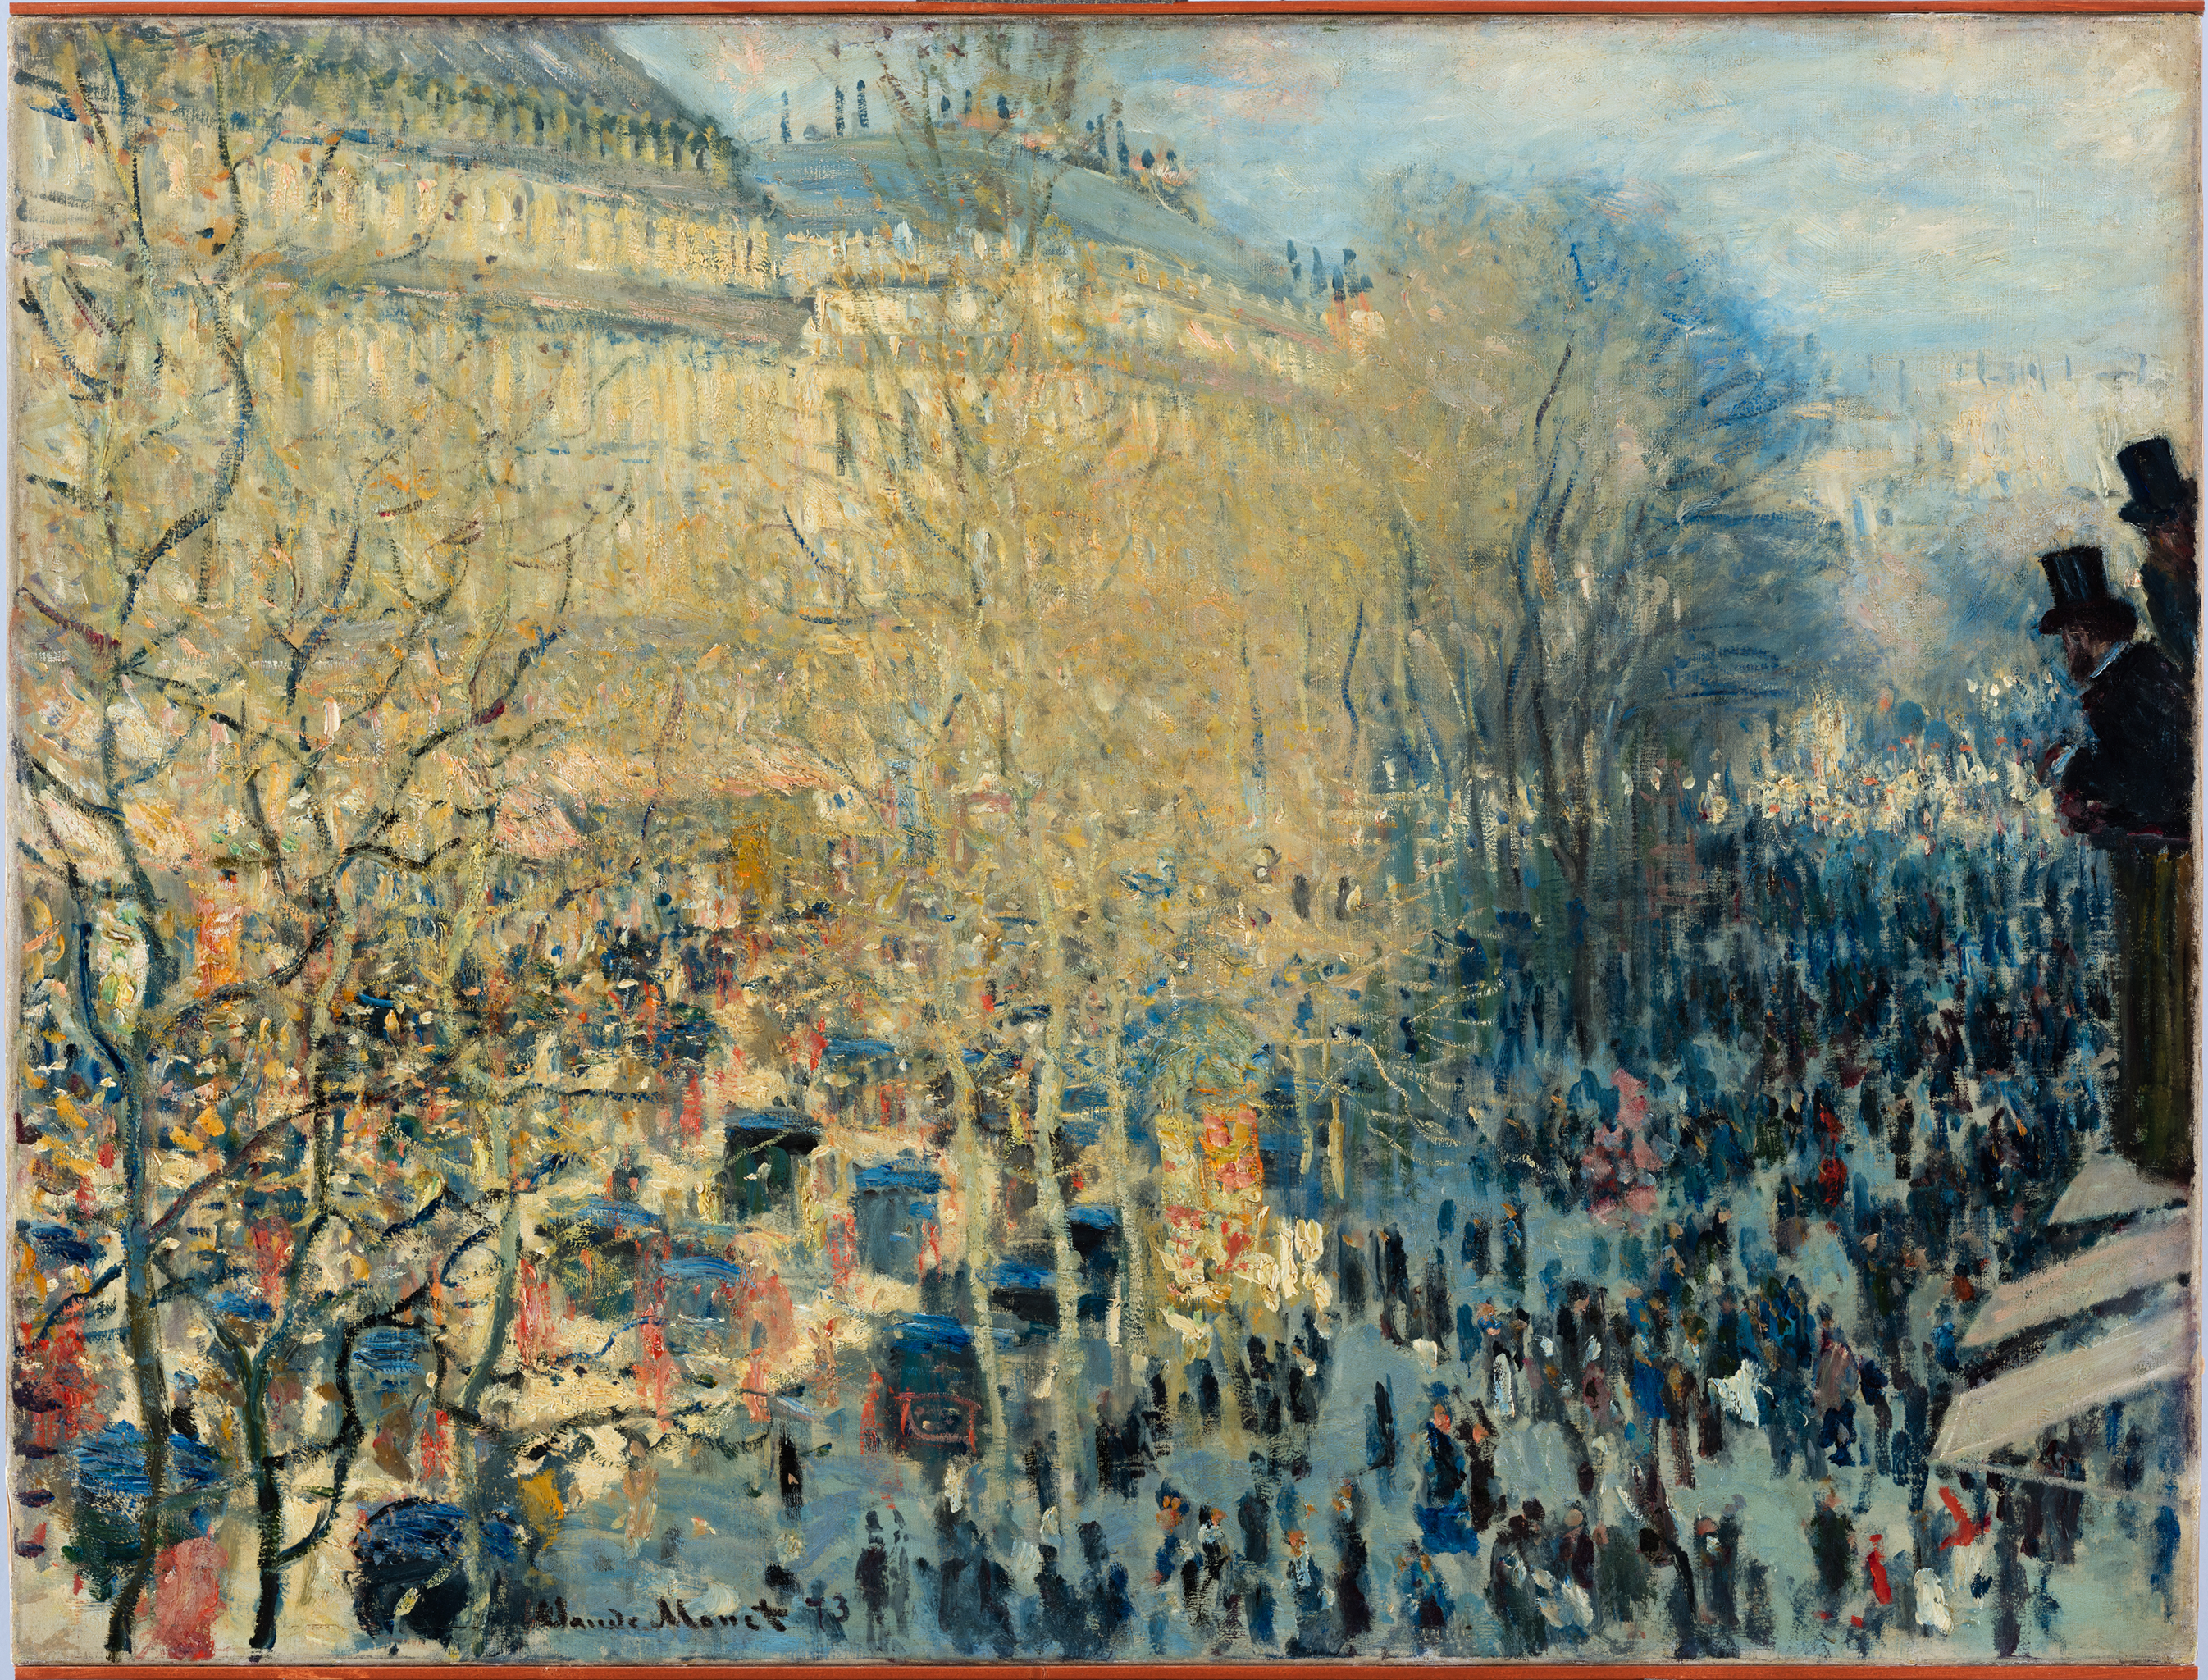 A painting depicting a street with hundreds of people walking down it along with dozens of carriages. Between them, are rows of leafless trees. On the other side are large and long buildings along the street. To the right in the foreground, there are two men wearing black top hats watching the crowd.